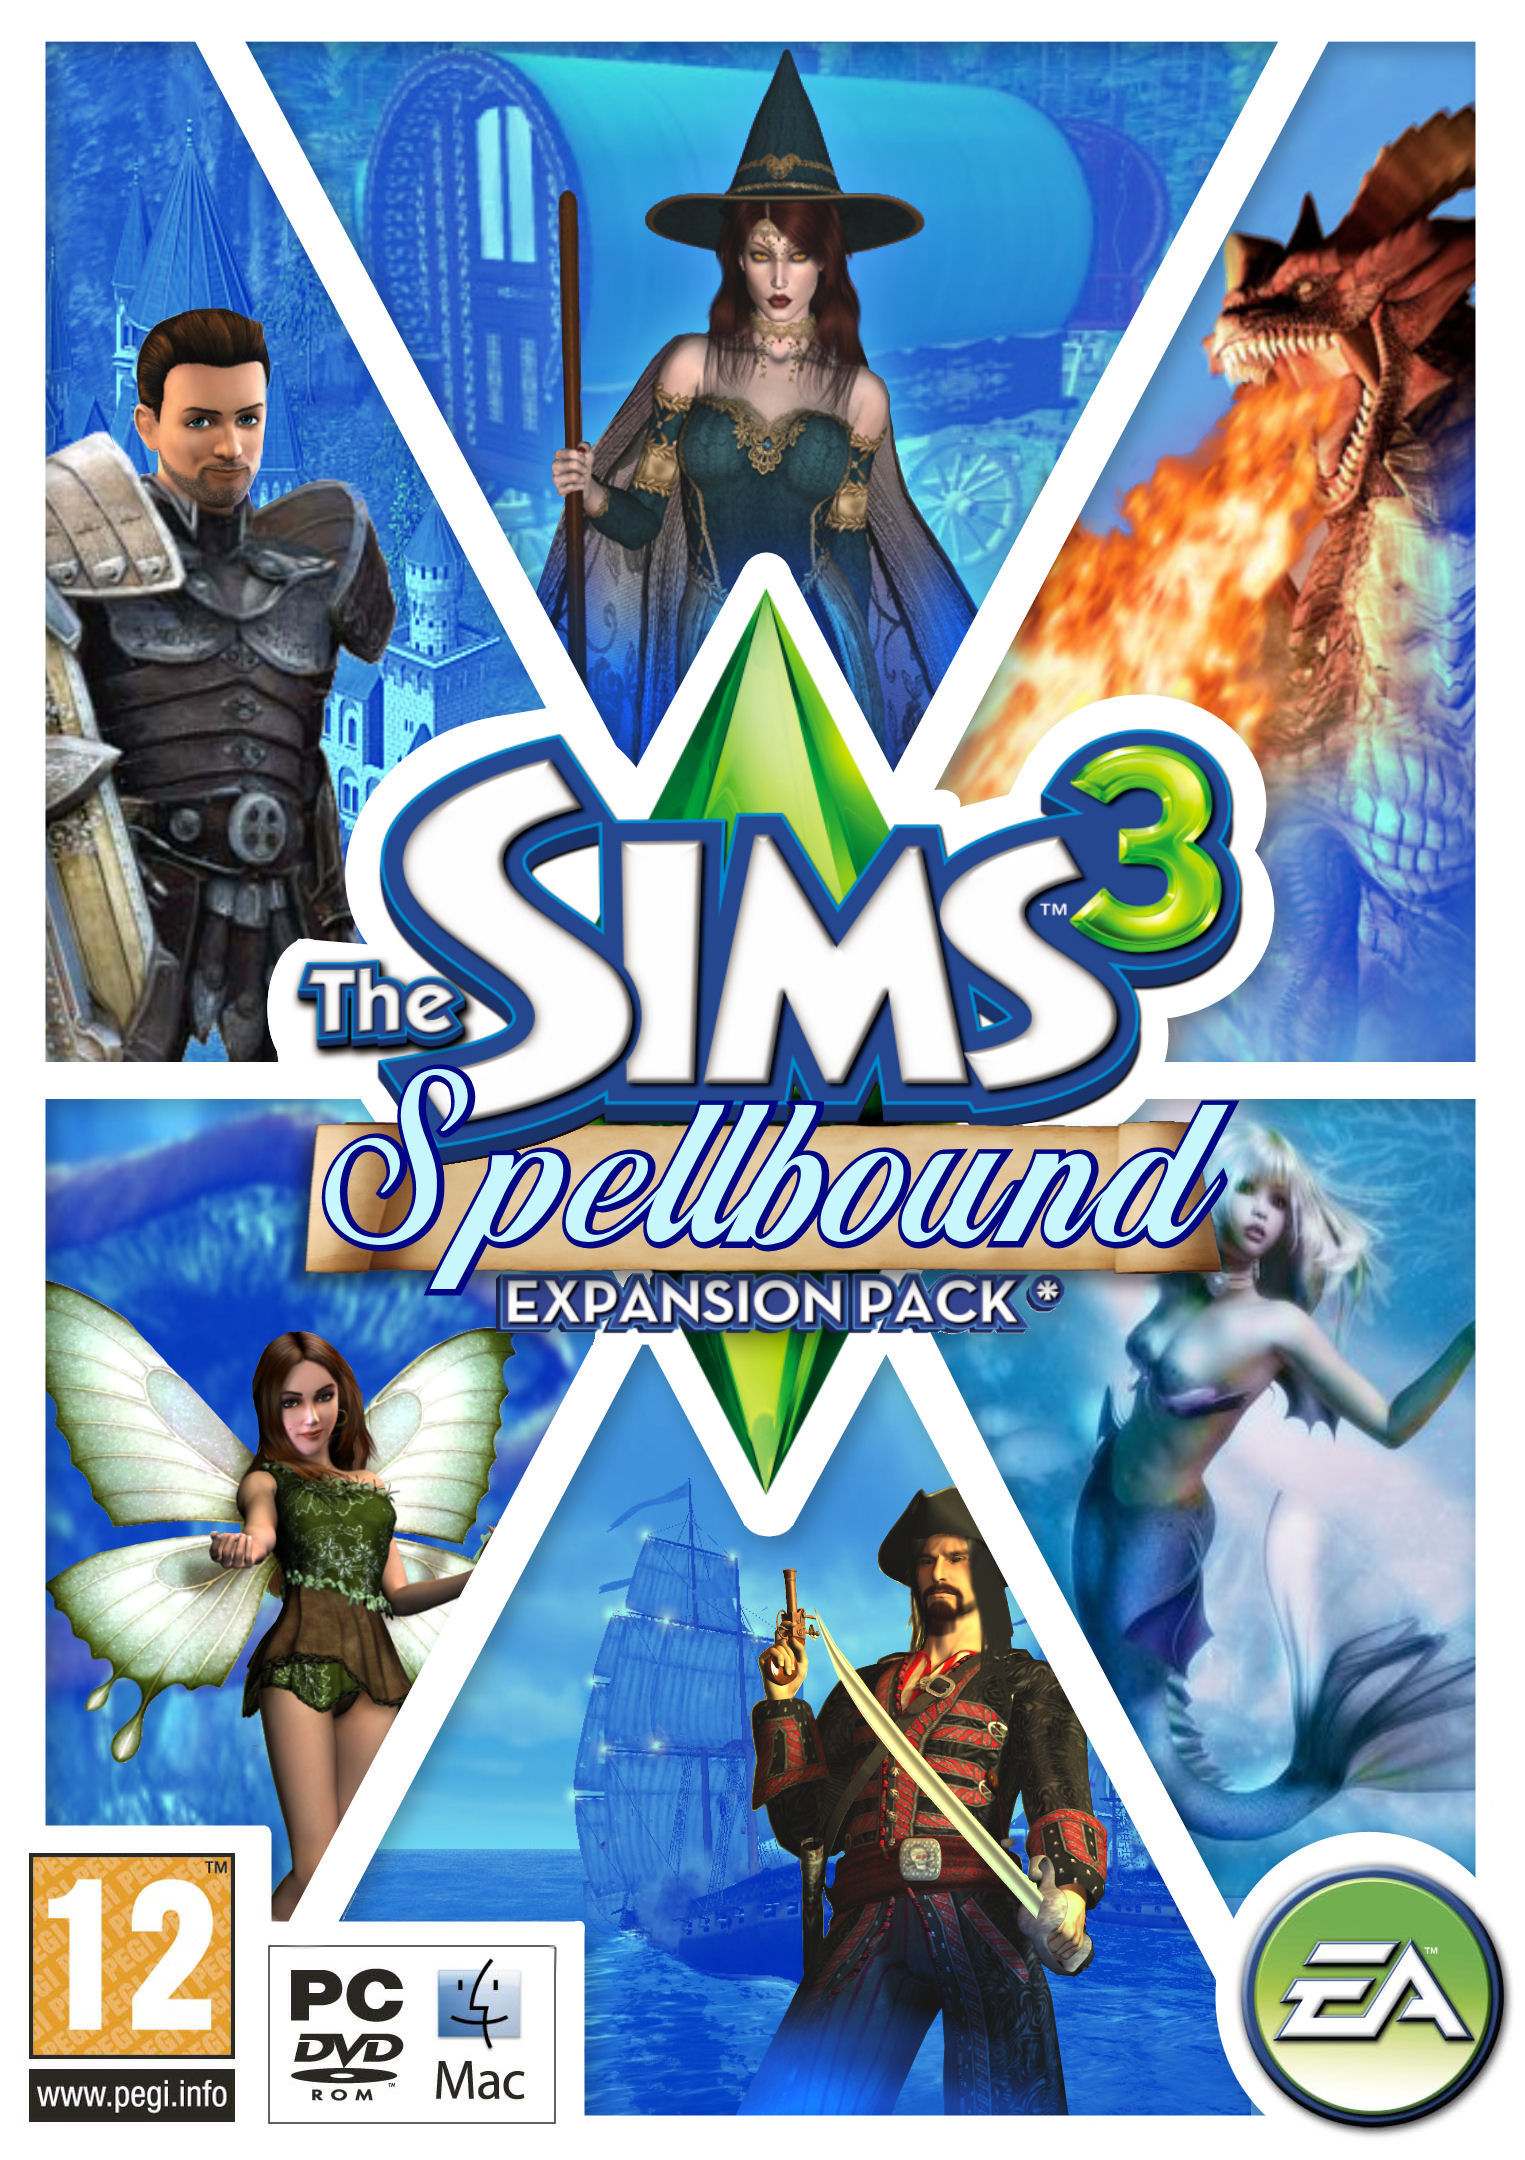 sims expansion packs